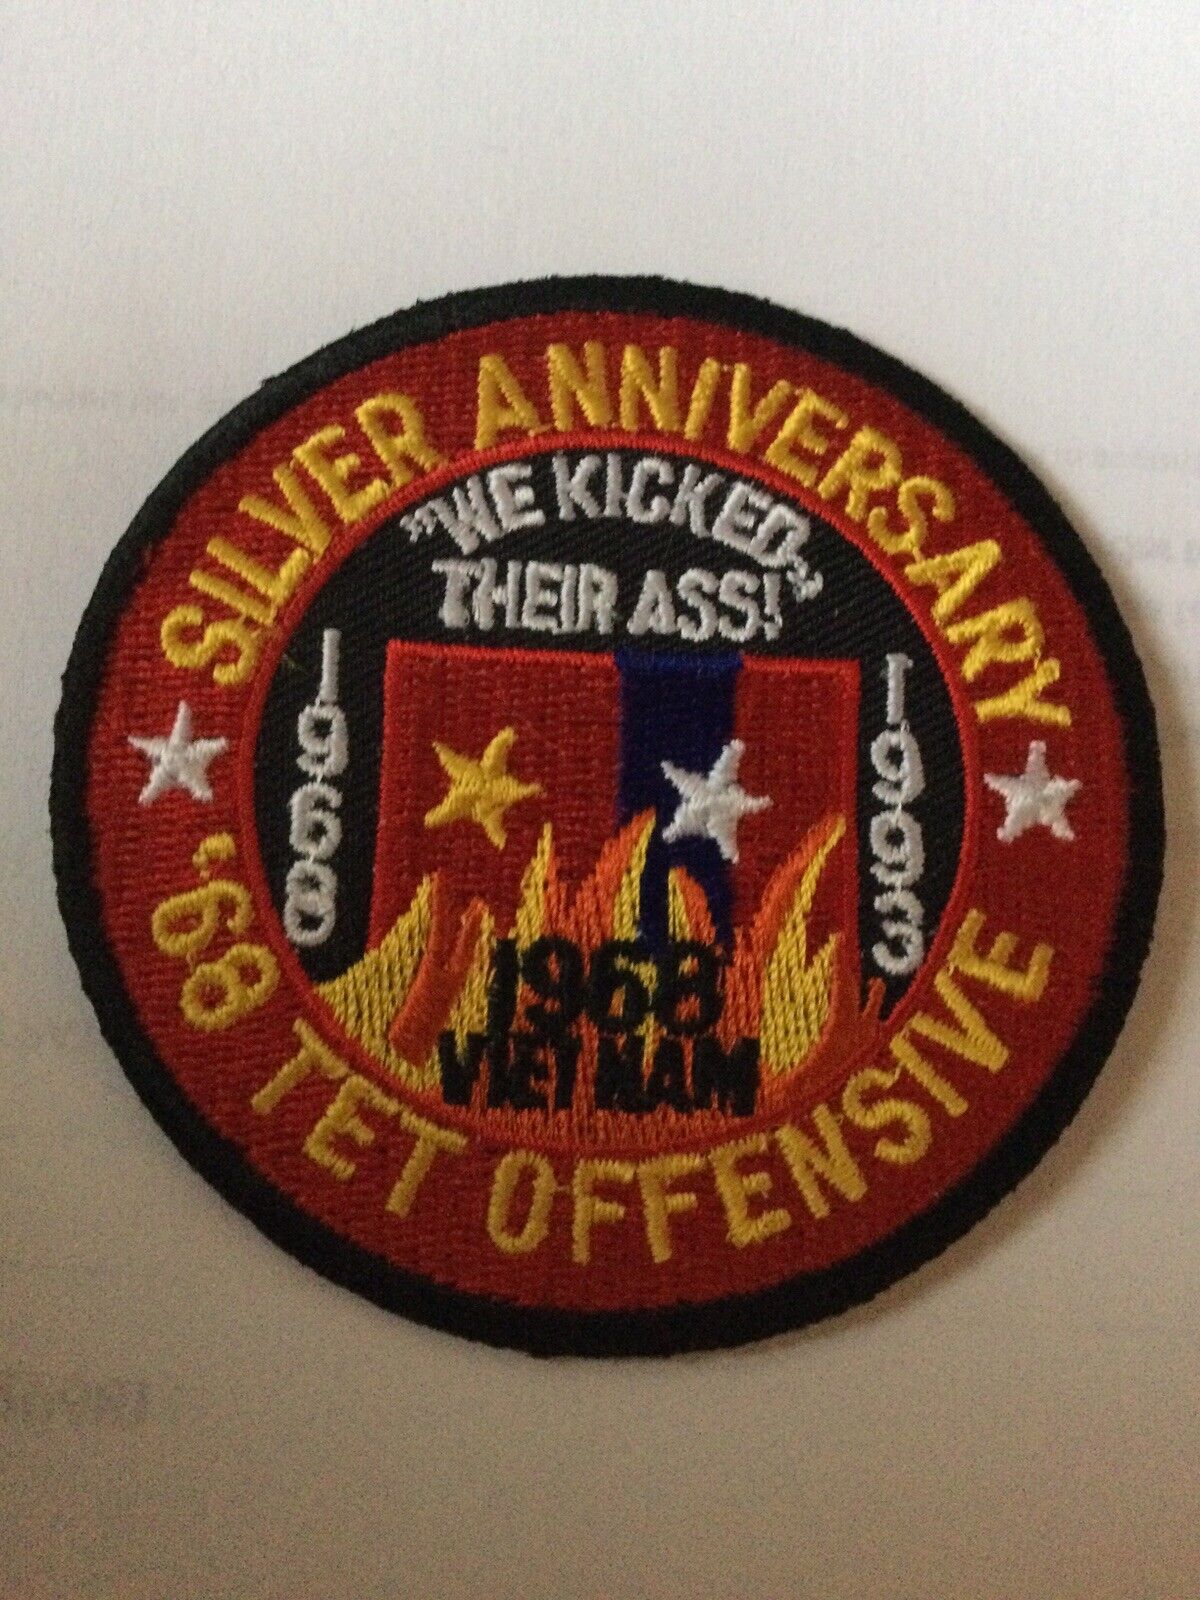 TET OFFENSIVE 68  SILVER ANNIVERSARY  WE KICKED THEIR ASS PATCH 3” NEW